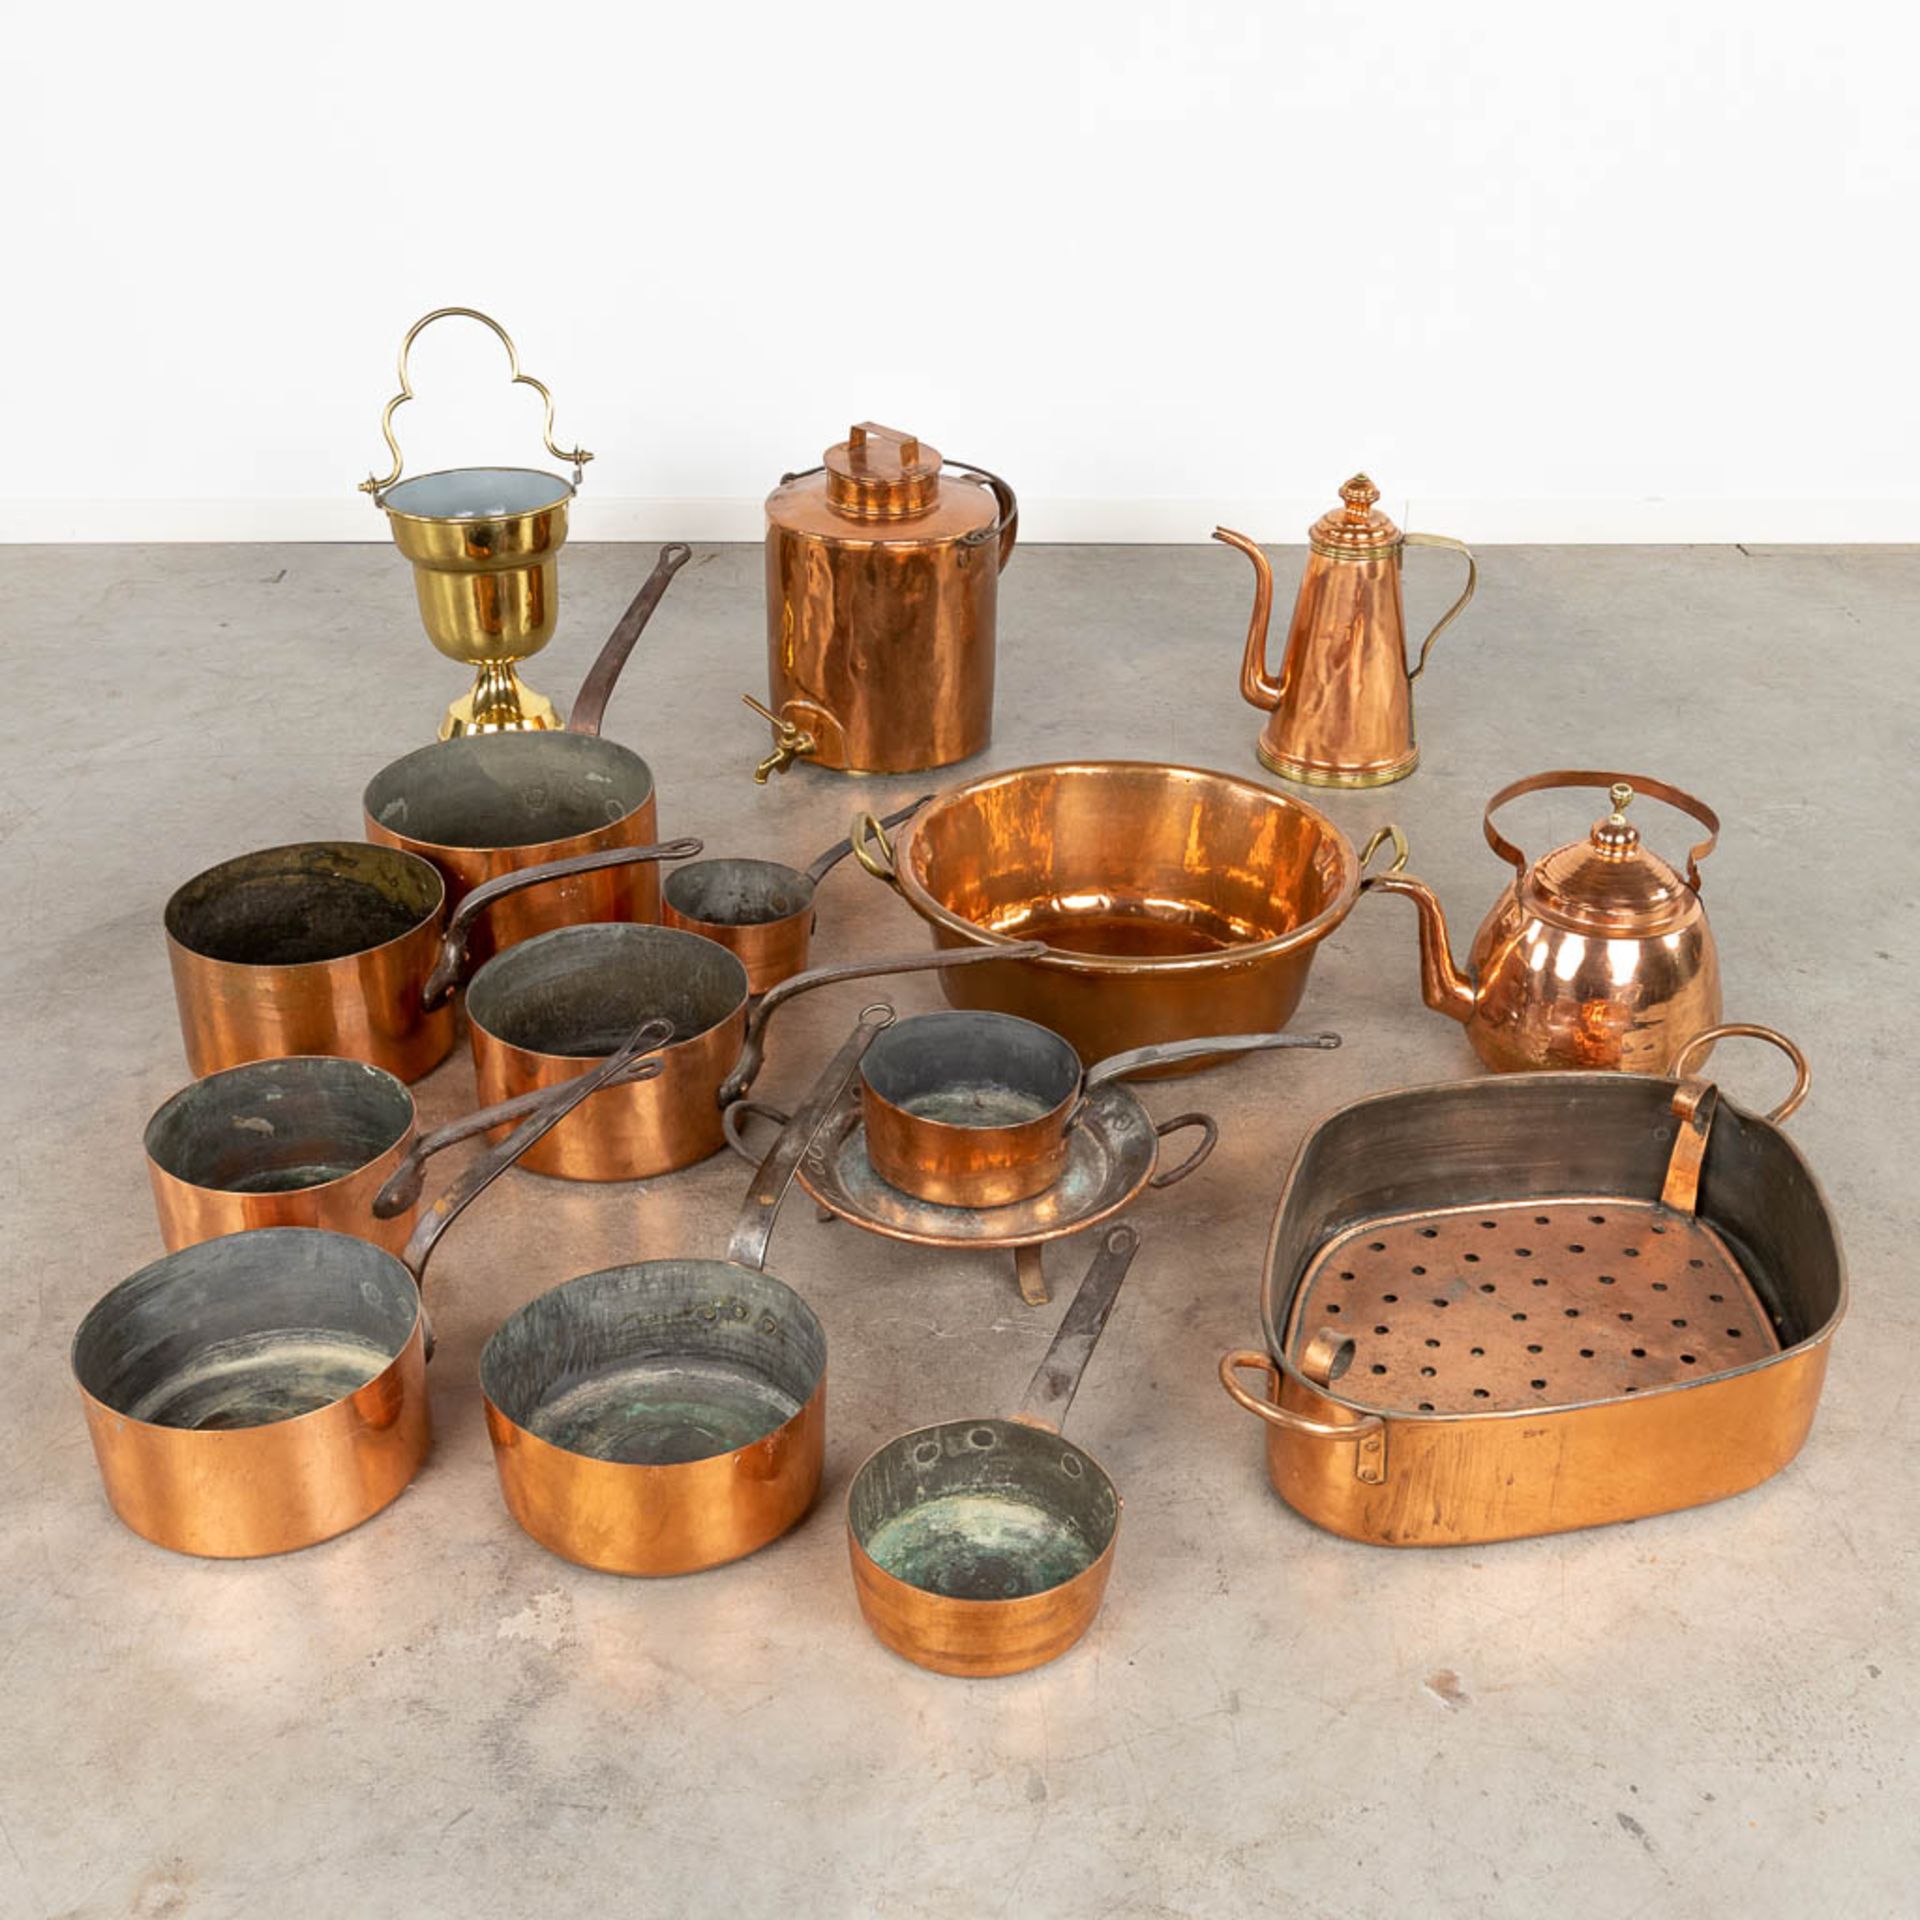 A collection of copper accessories and kitchen utensils. (W:47 x H:40 x D:35 cm)